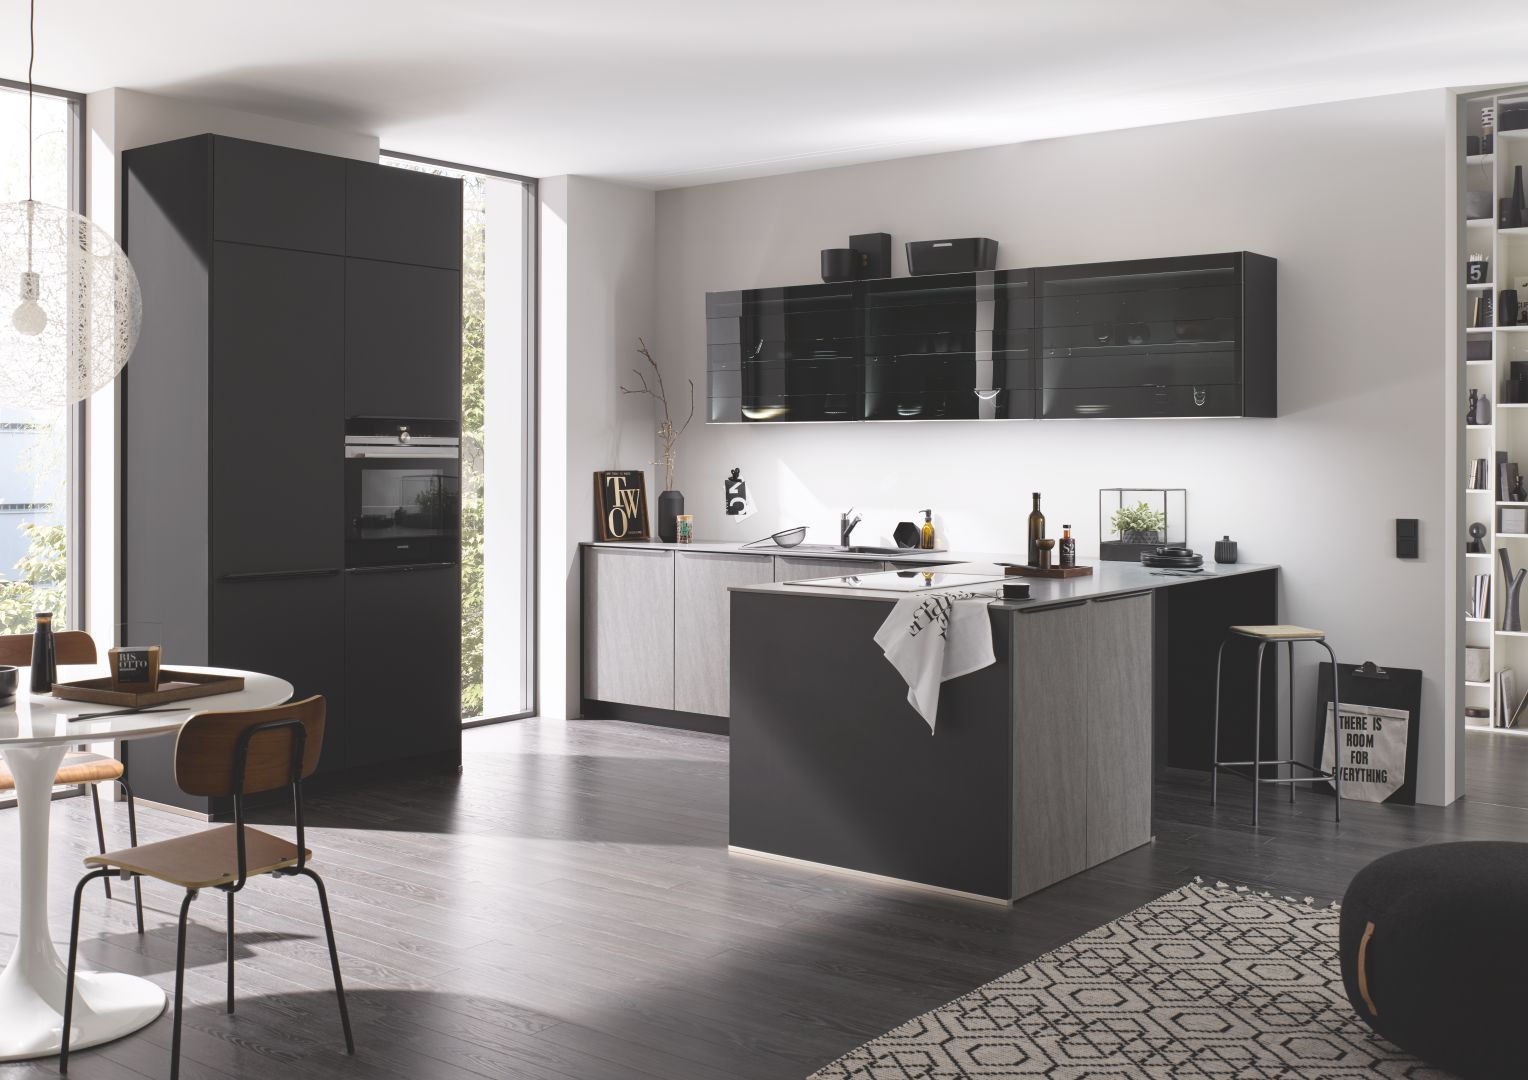 Framelss cabinets - a better choice for small kitchens